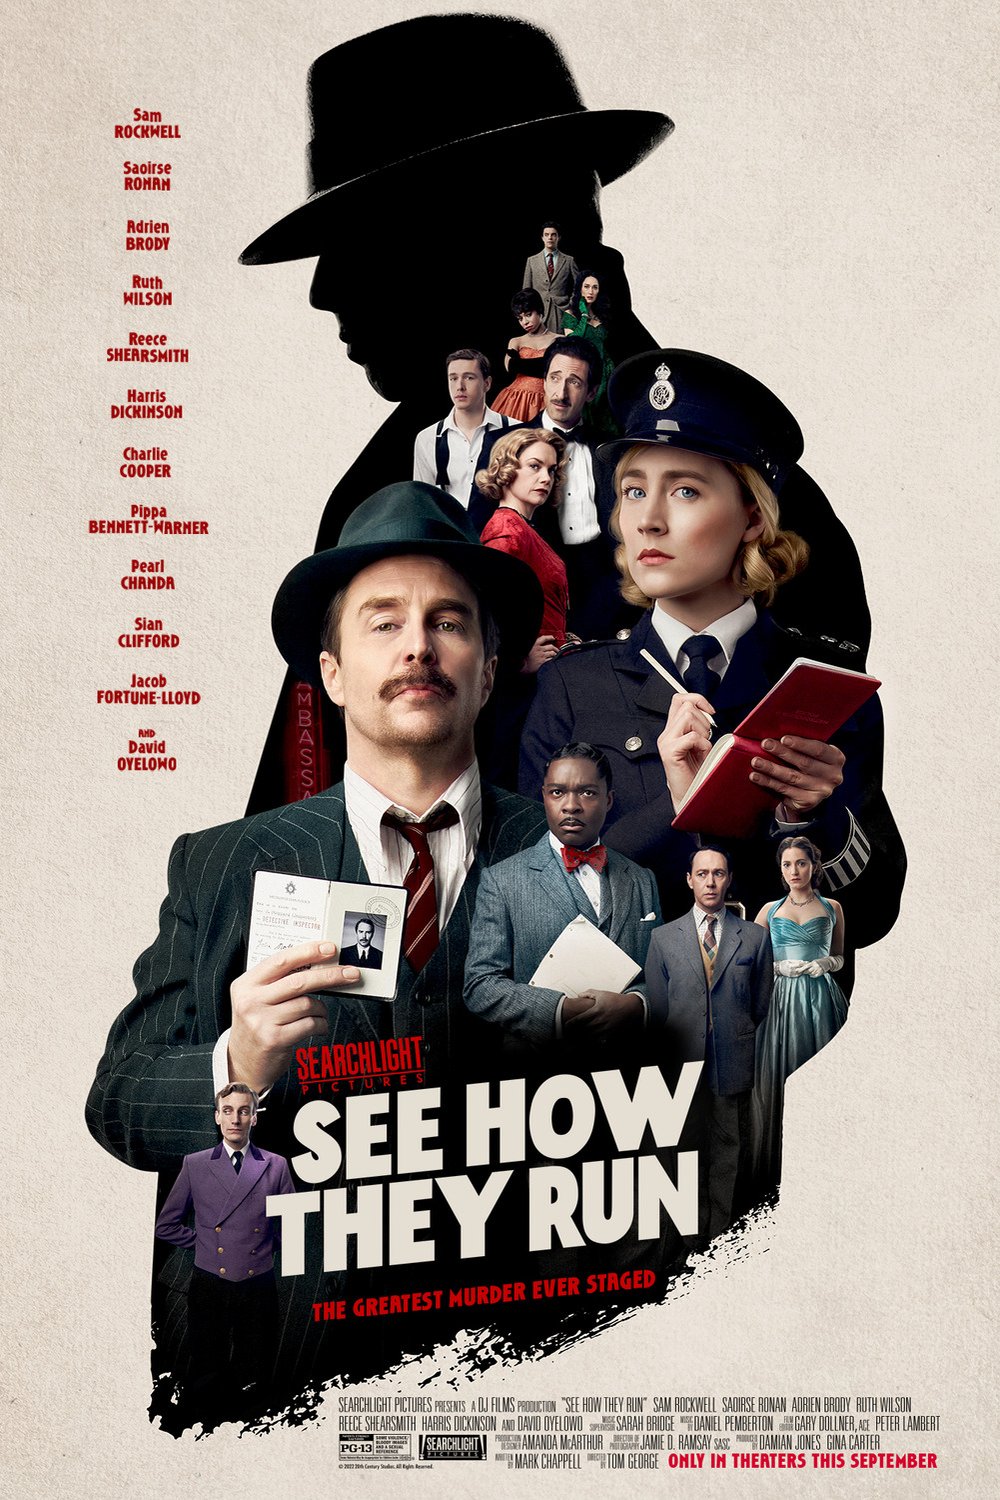 Poster of the movie See How They Run